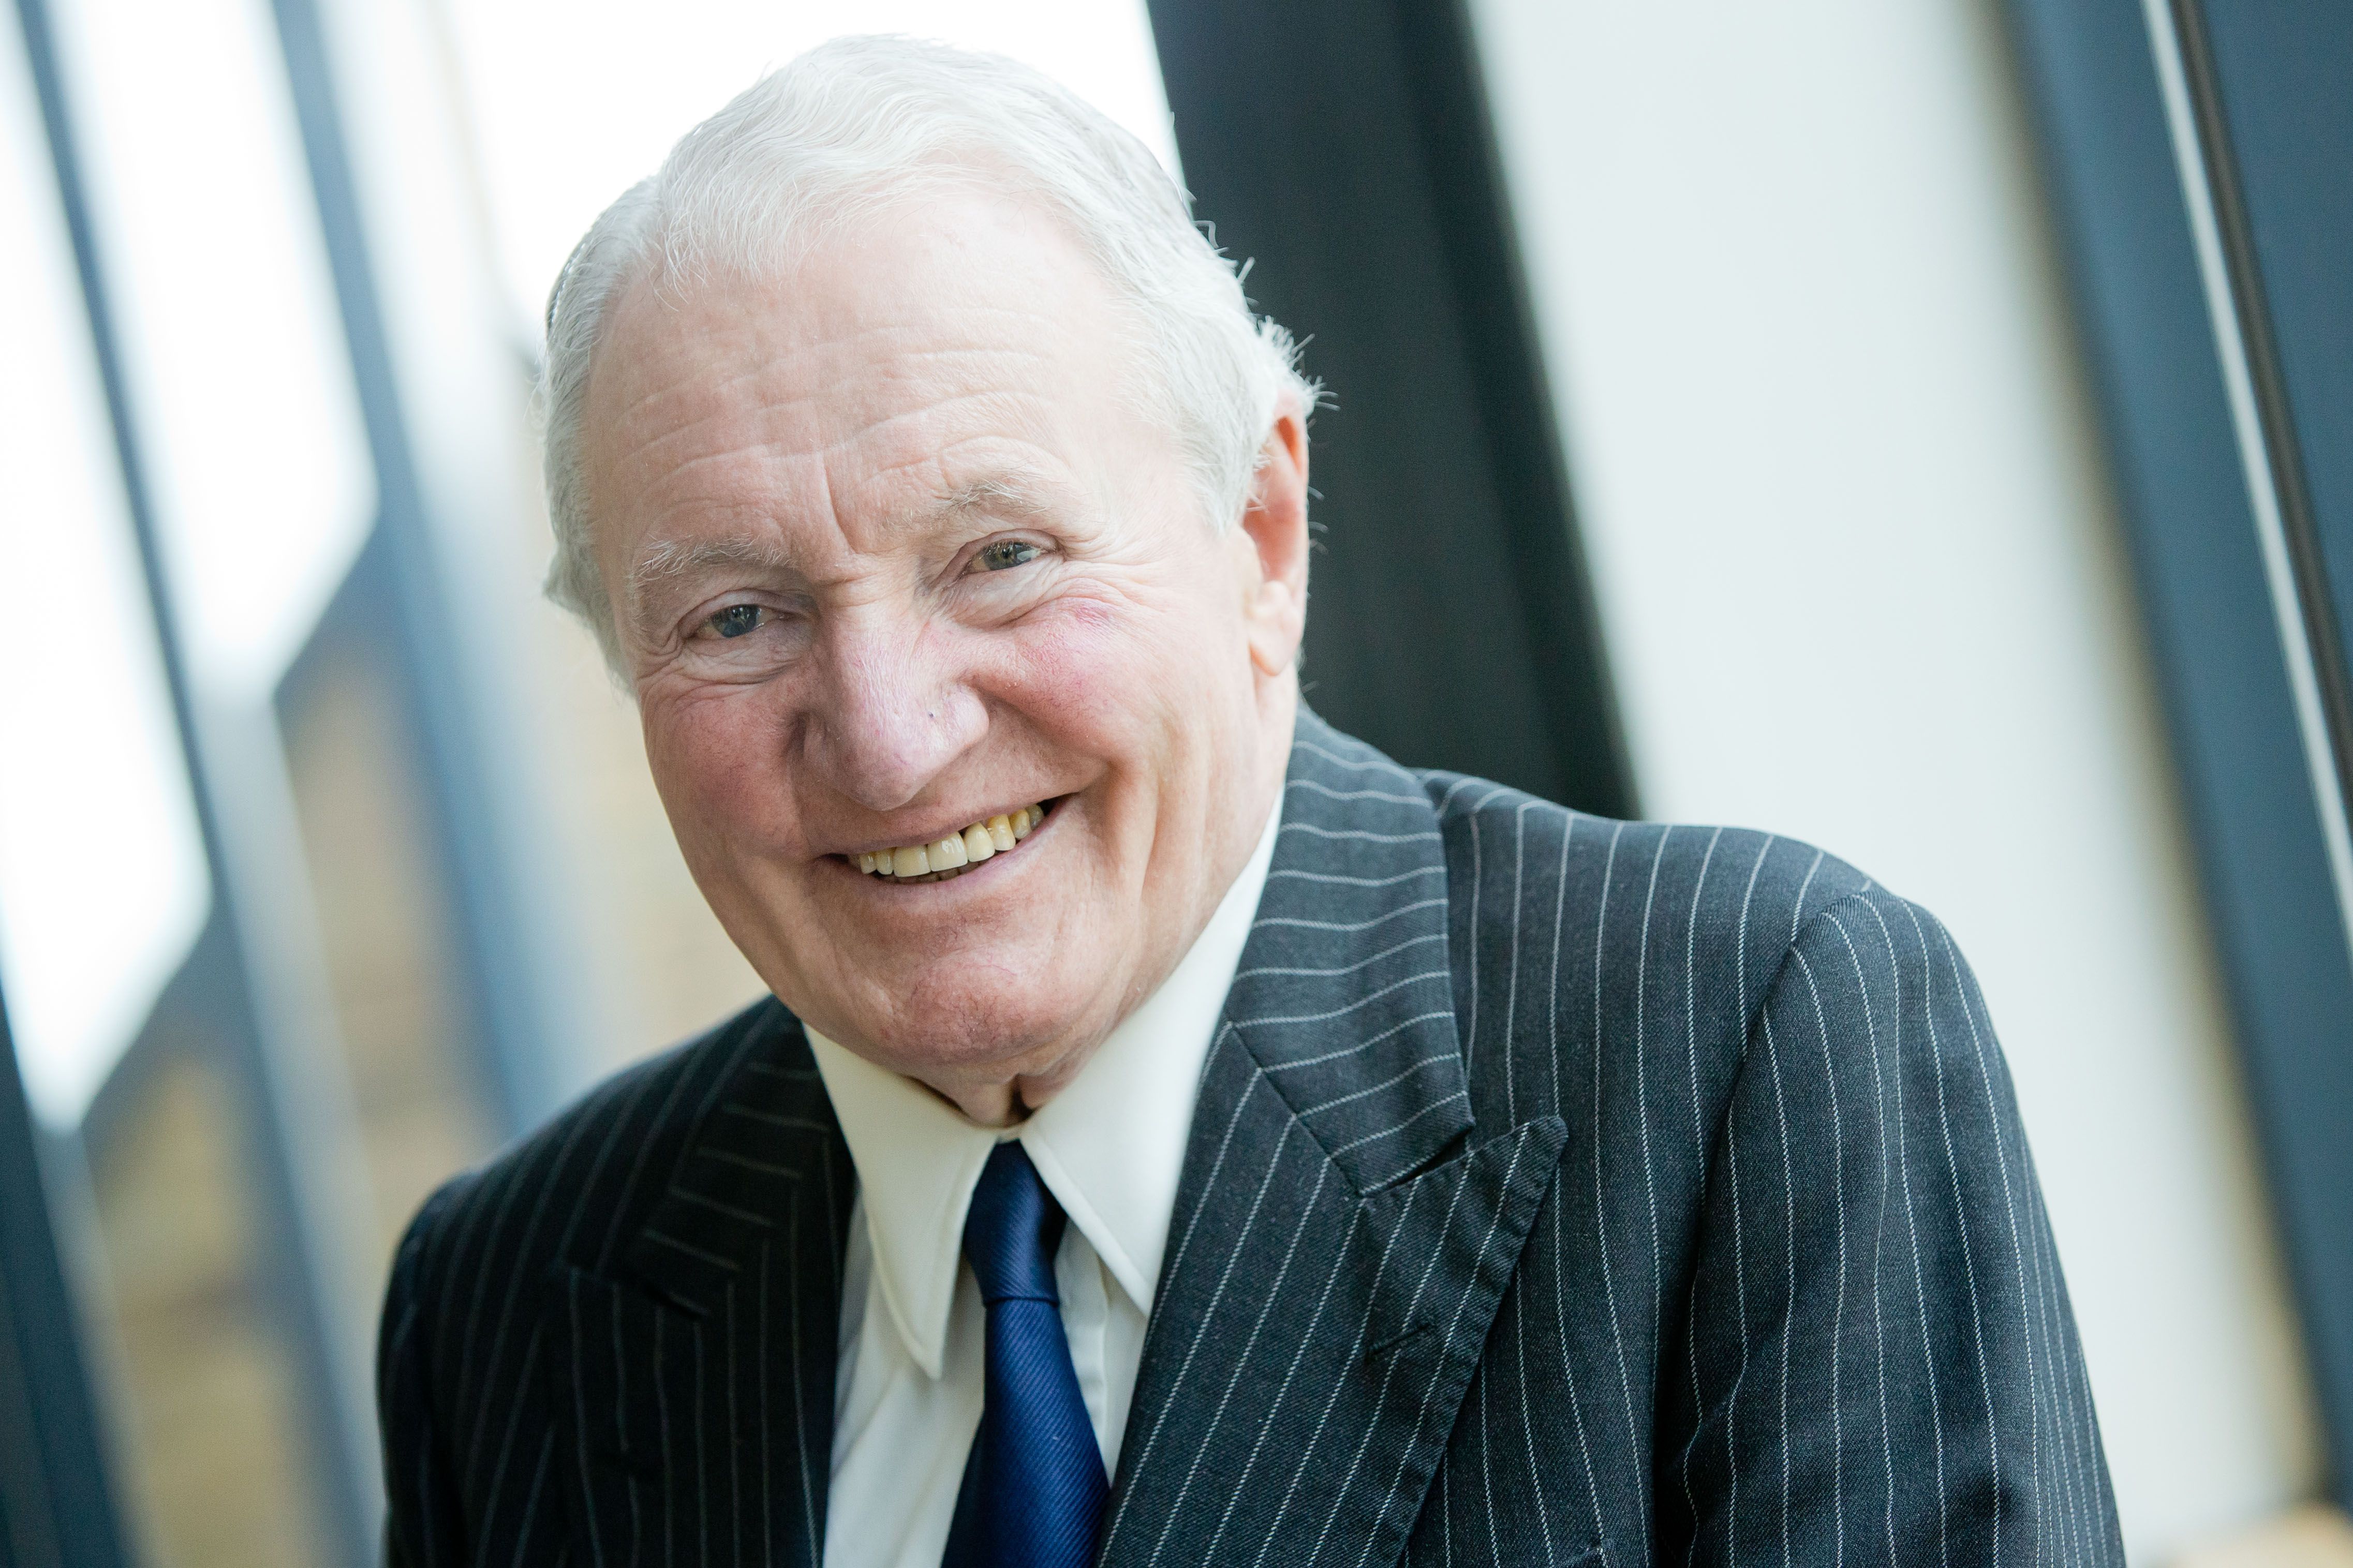 Paddy Hopkirk the Ambassador to Champion Mature Driver Safety for IAM RoadSmart